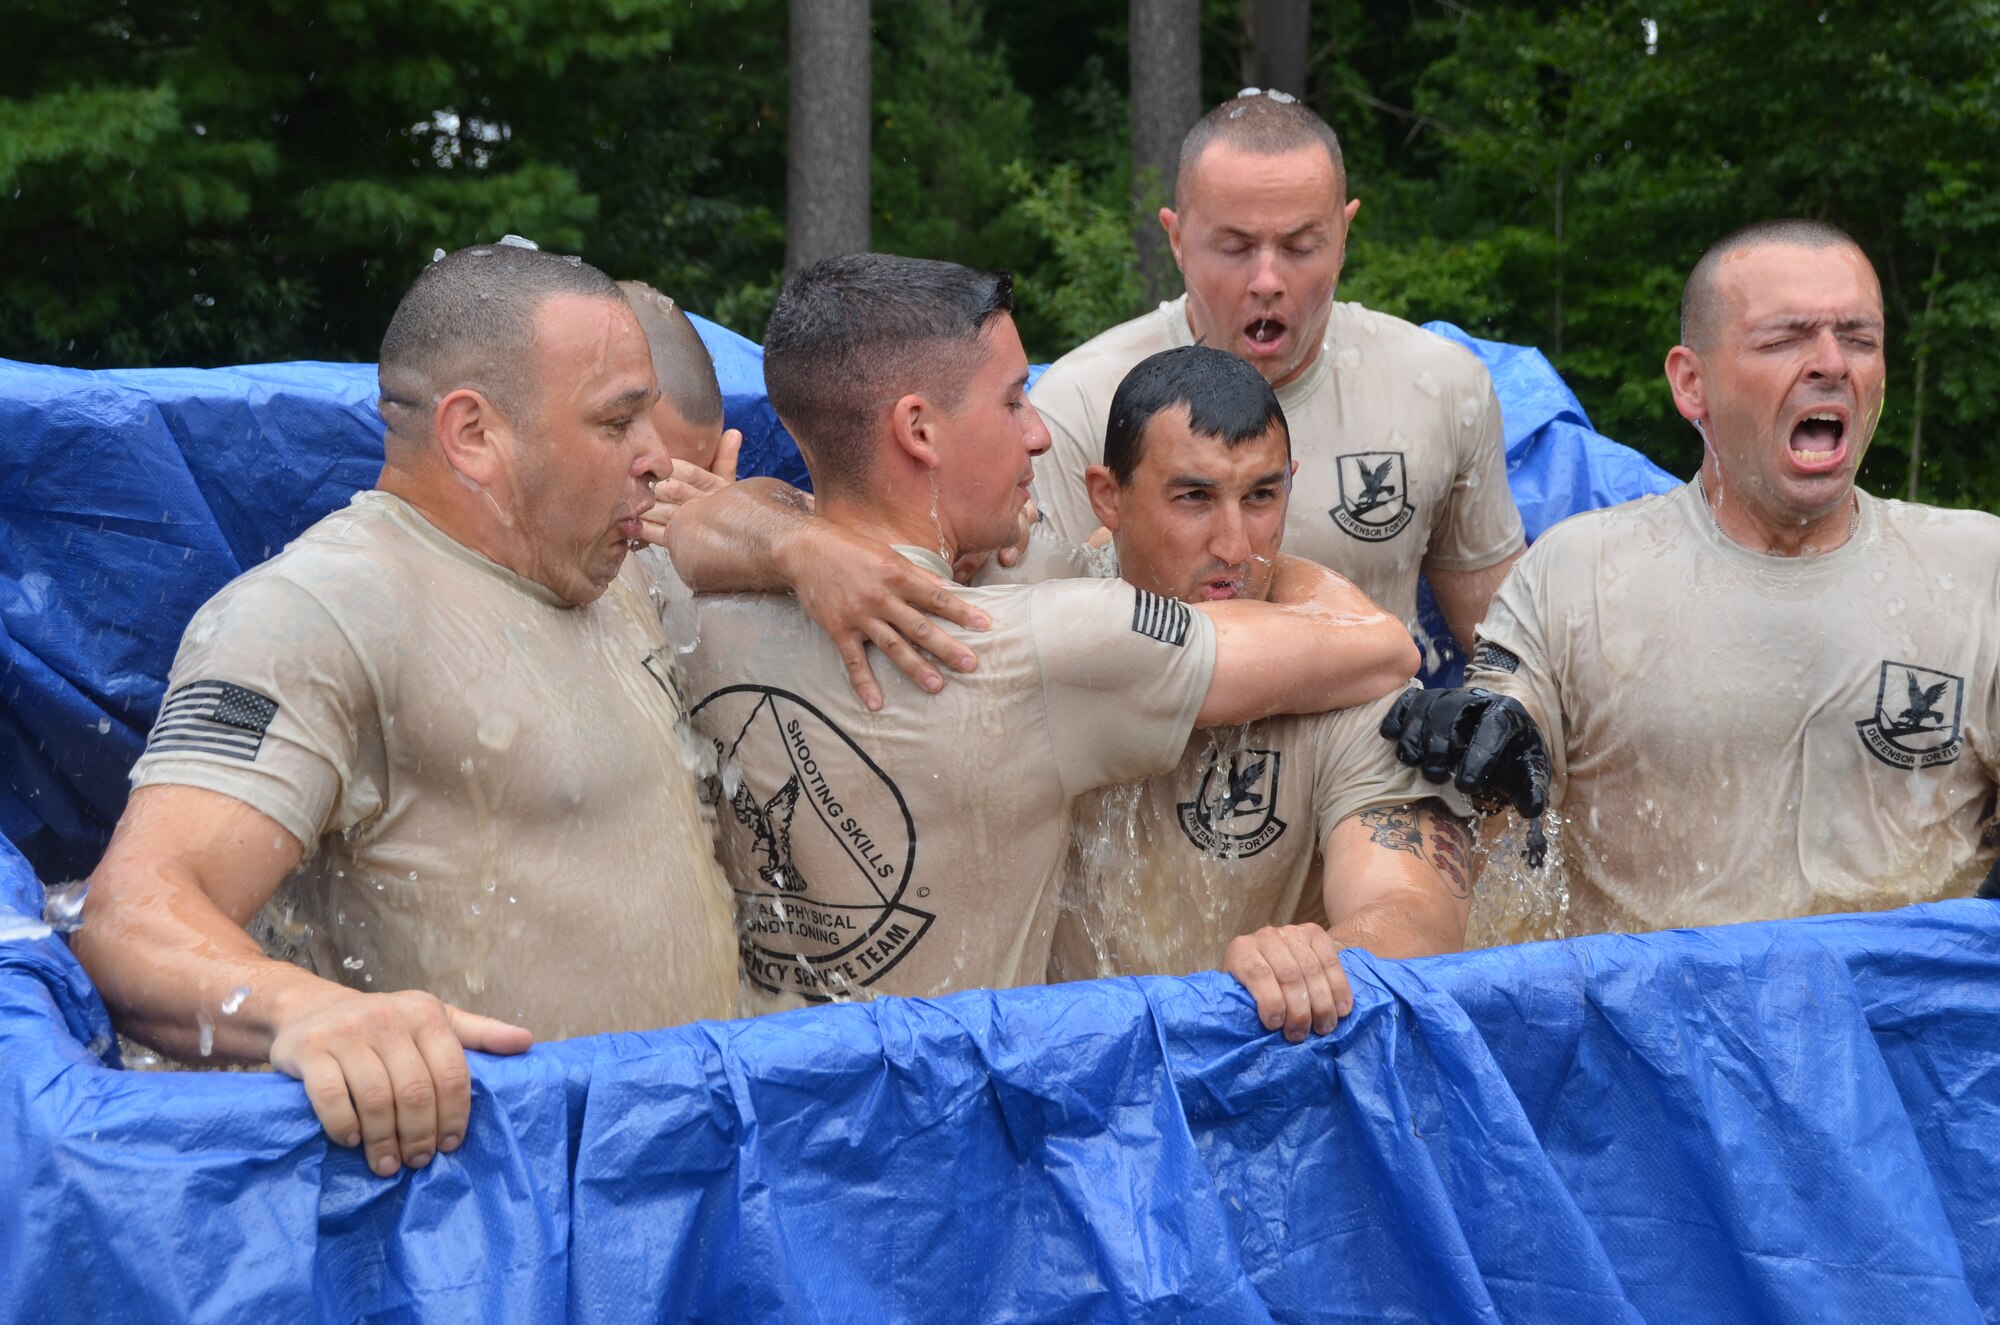 Members of the 103rd Security Forces Squadron emergency services team endure an ice-water plunge at the West Hartford Reservoir as part of the Connecticut SWAT Challenge Aug. 22, 2013. The ice bath was just one of many physically grueling obstacles competitors faced. (U.S. Air National Guard Photo by Maj. Bryon Turner)